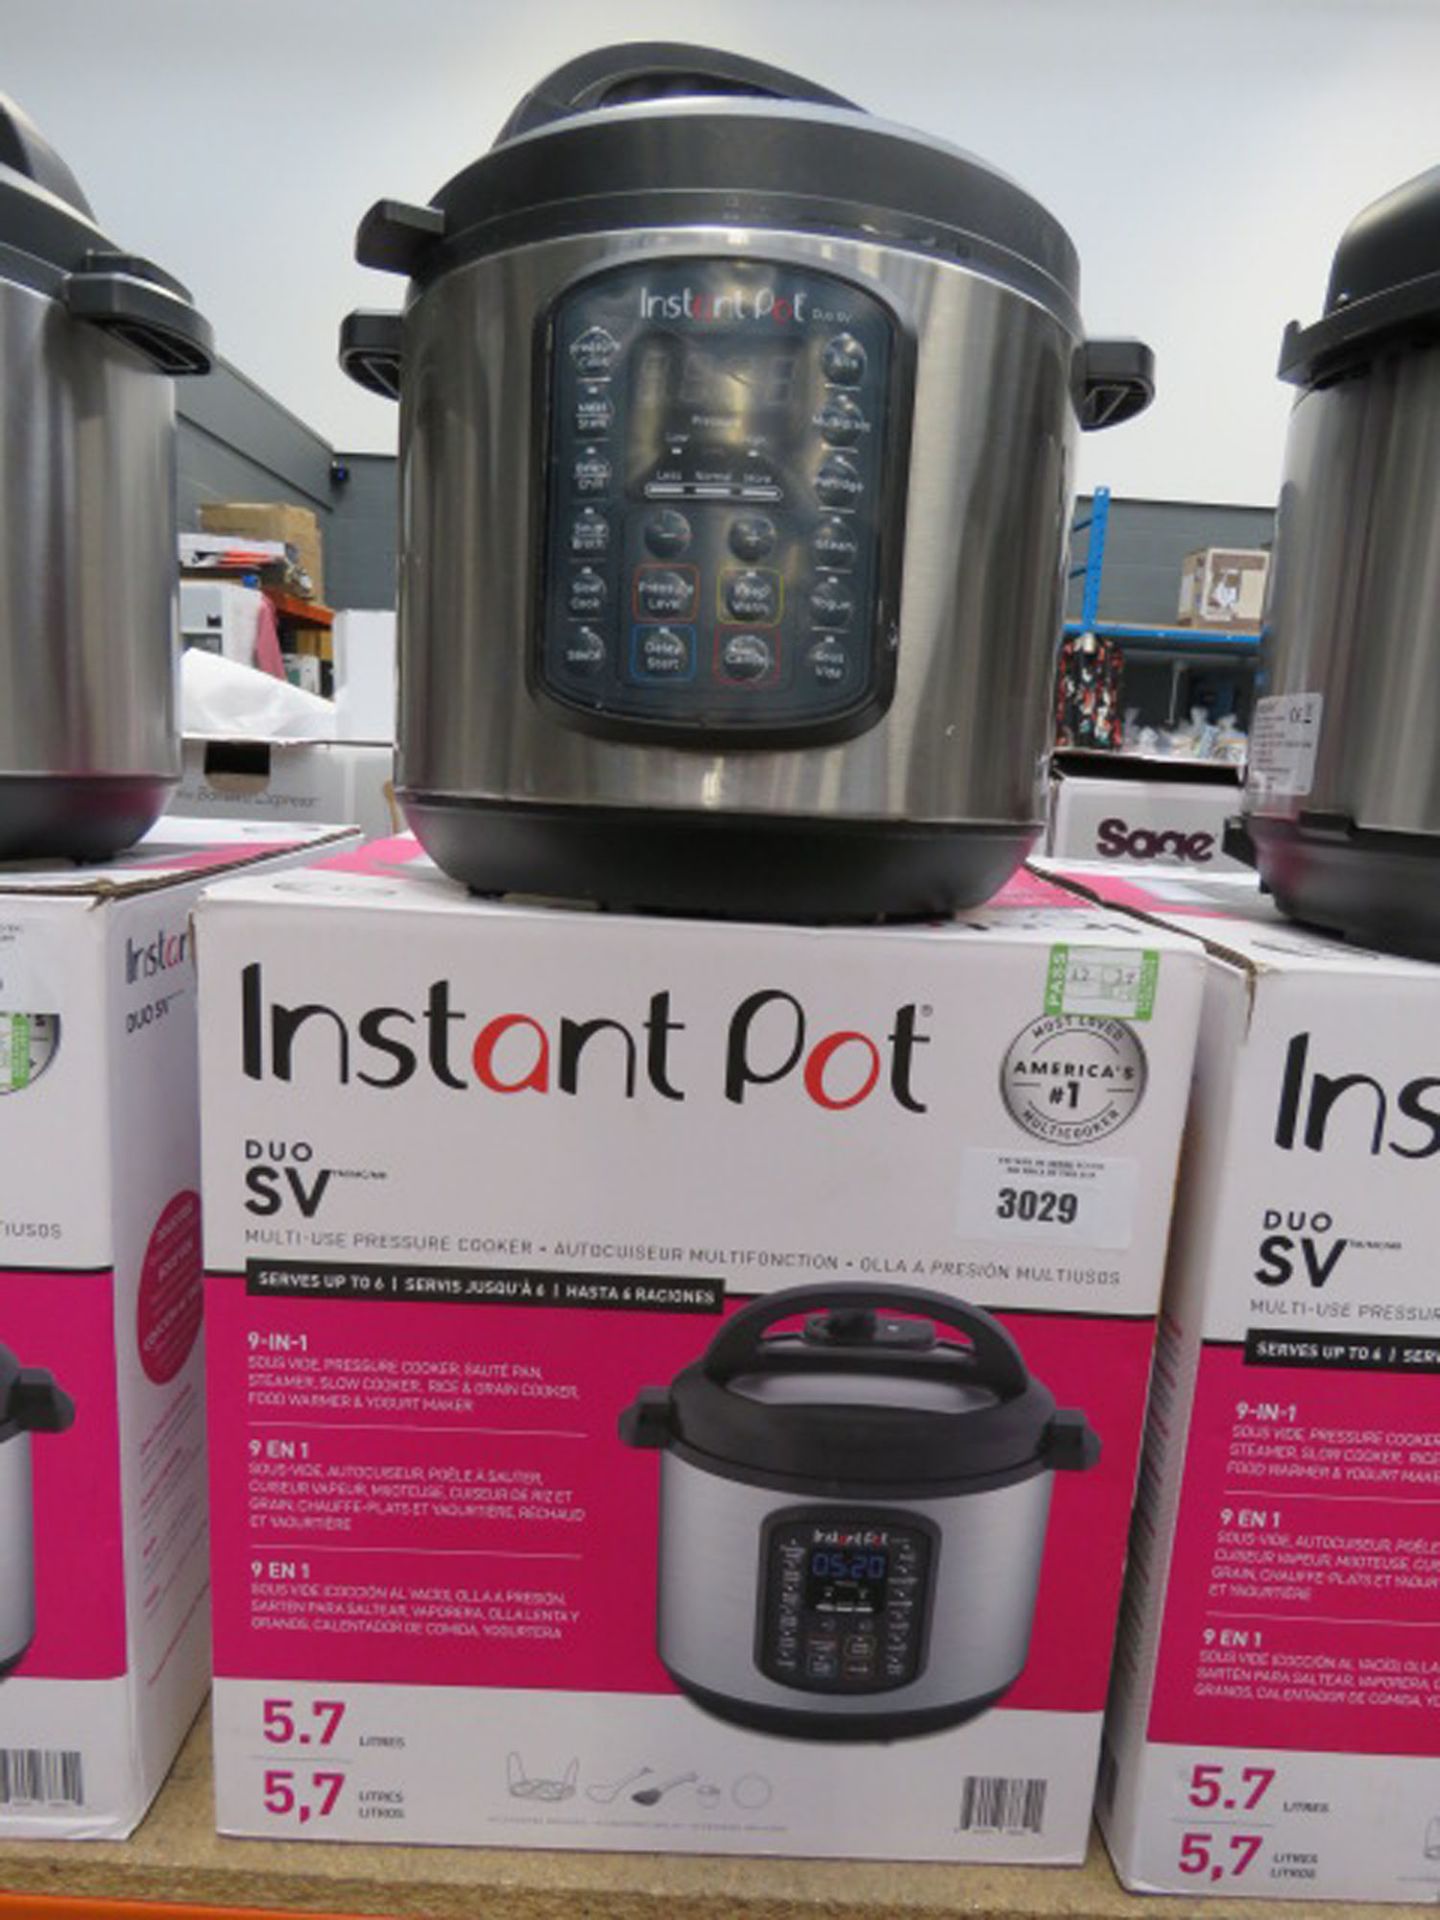 (39) Instant Pot multi use pressure cooker with box